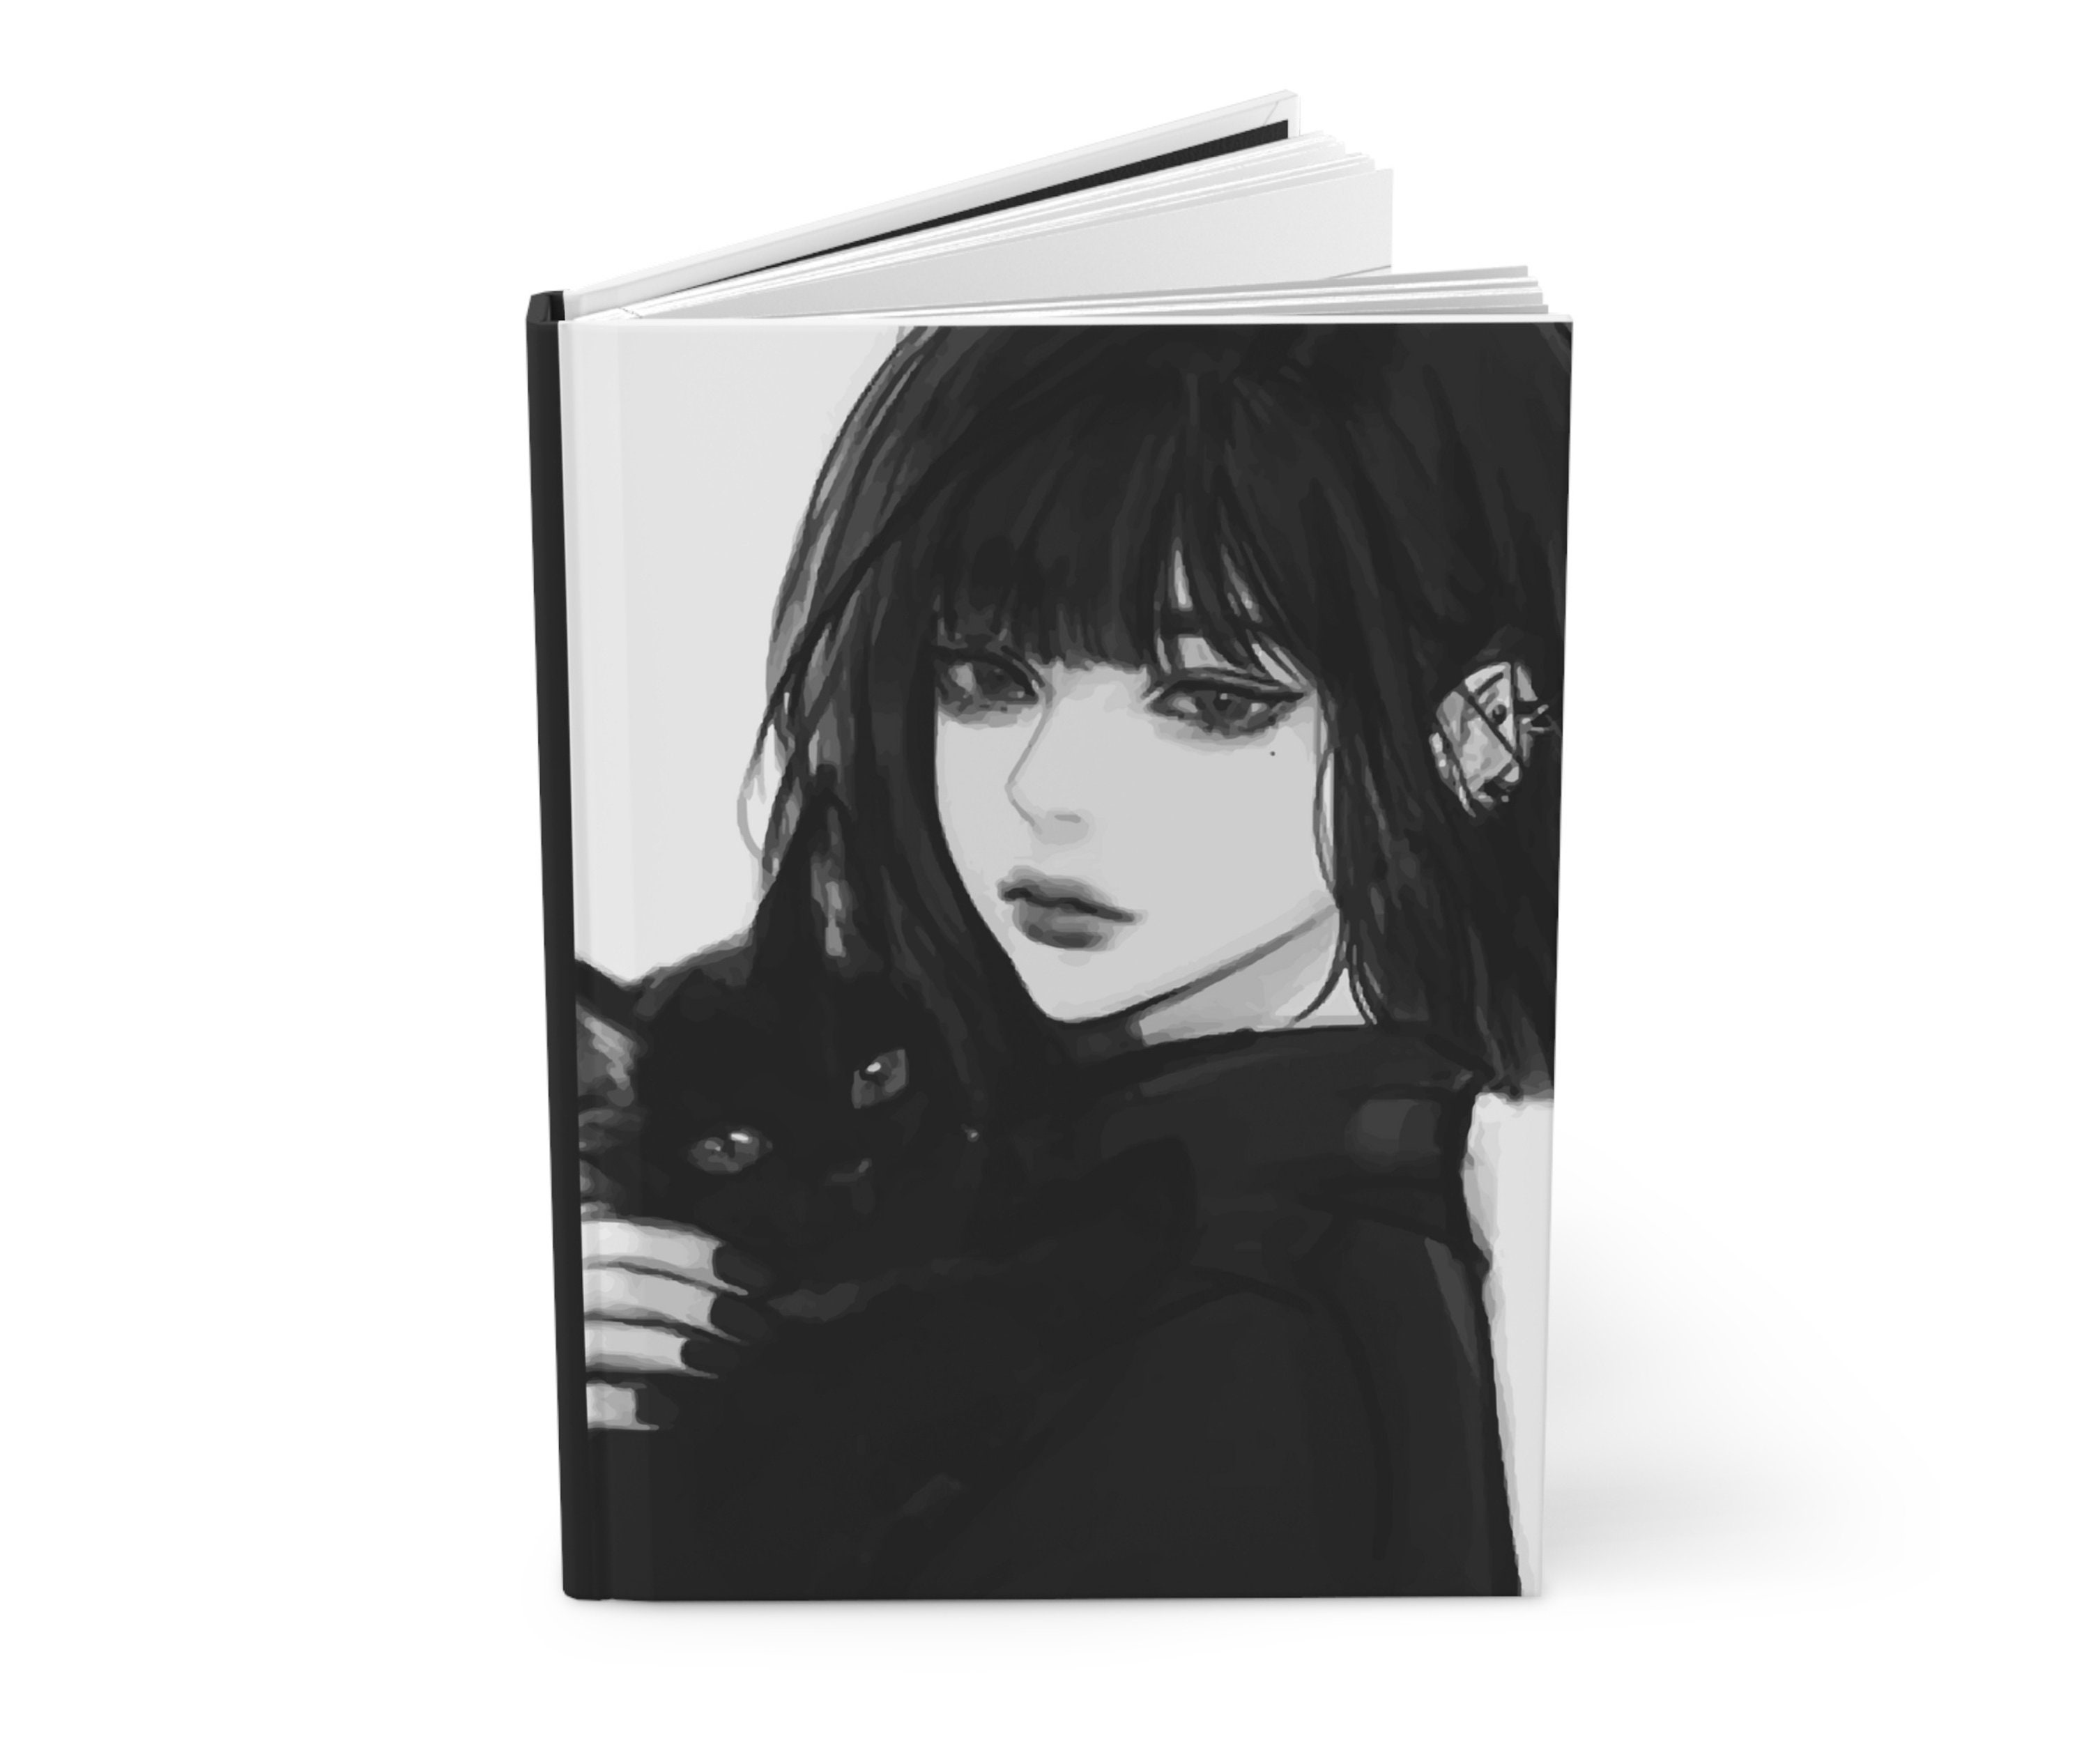  Anime Girl Japanese Aesthetic anime Otaku Meme: Daily Planner  Notepad To Do Schedule, Medium 6x9 Inches, 110 Pages, Printed Cover:  9798822319820: Kean, David: Books